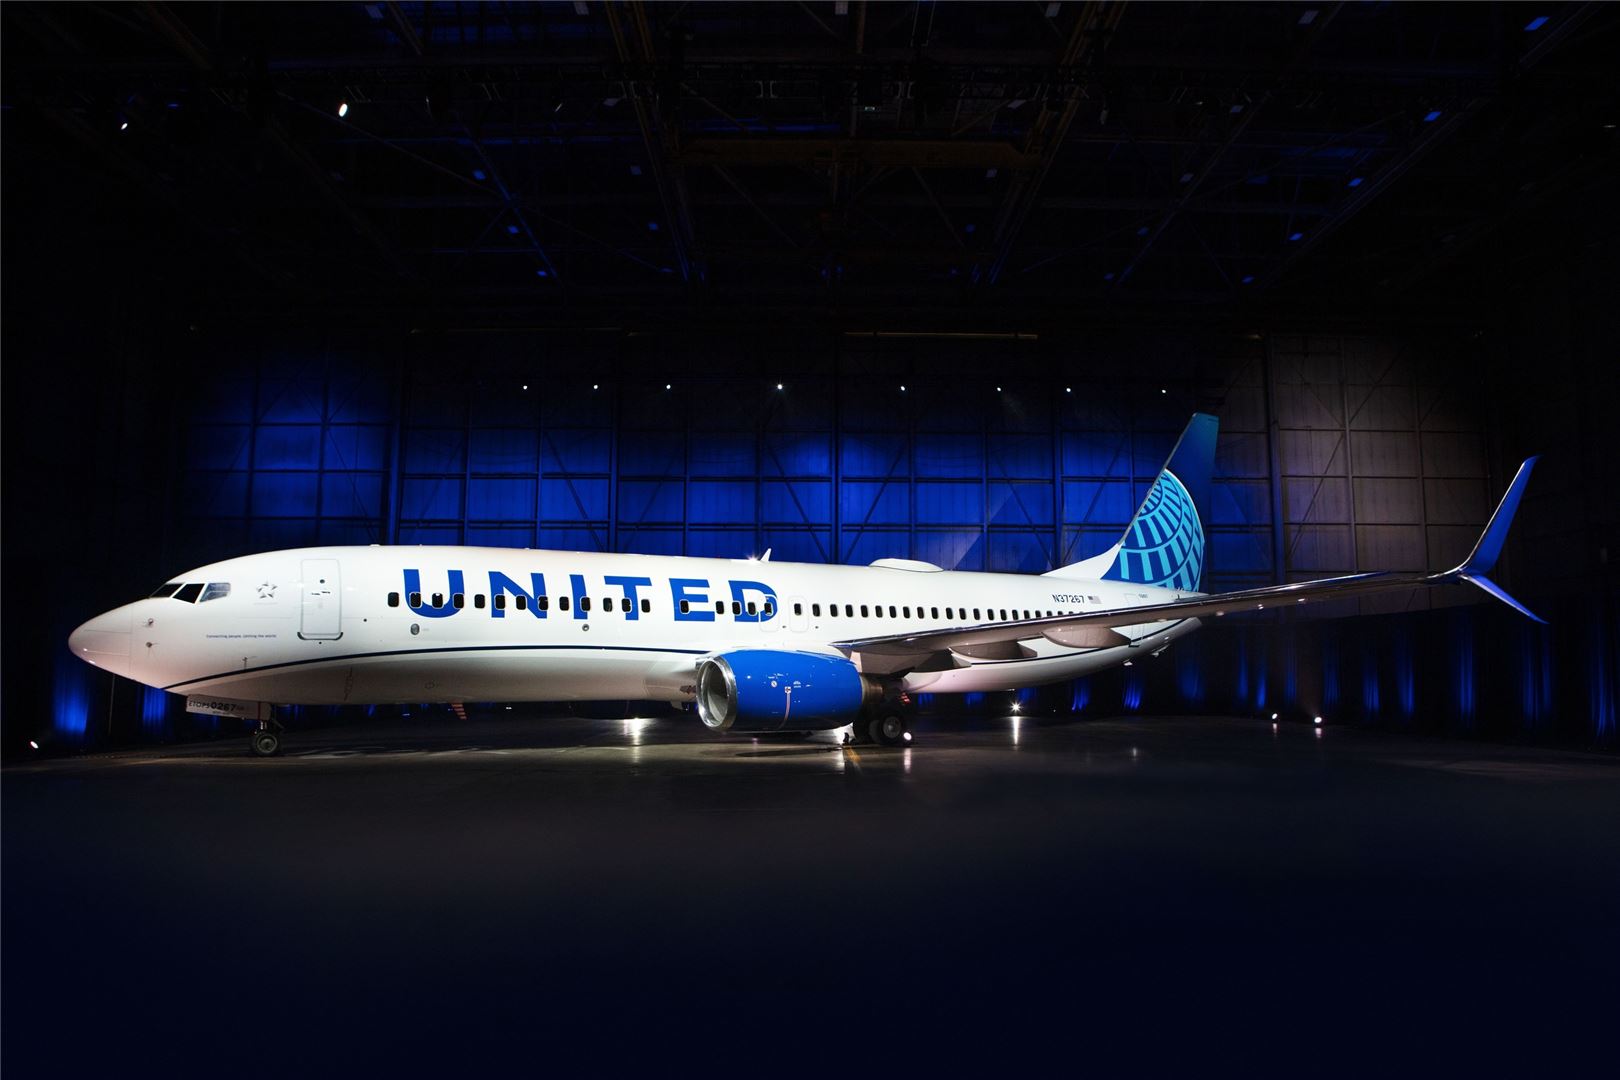 First Look: United Airlines’ New Livery